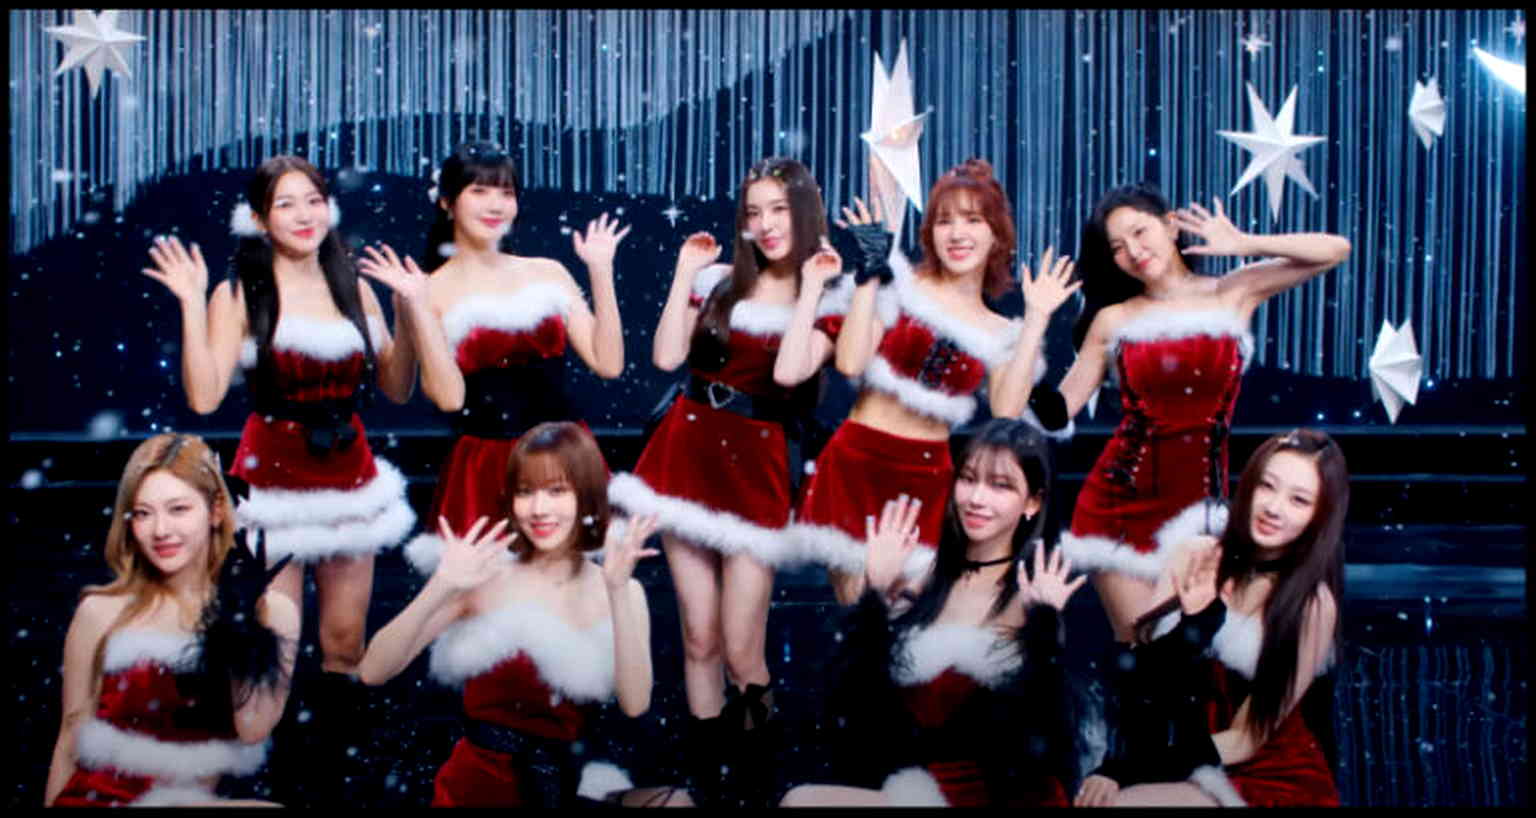 Red Velvet and aespa gift fans with collab single ‘Beautiful Christmas’